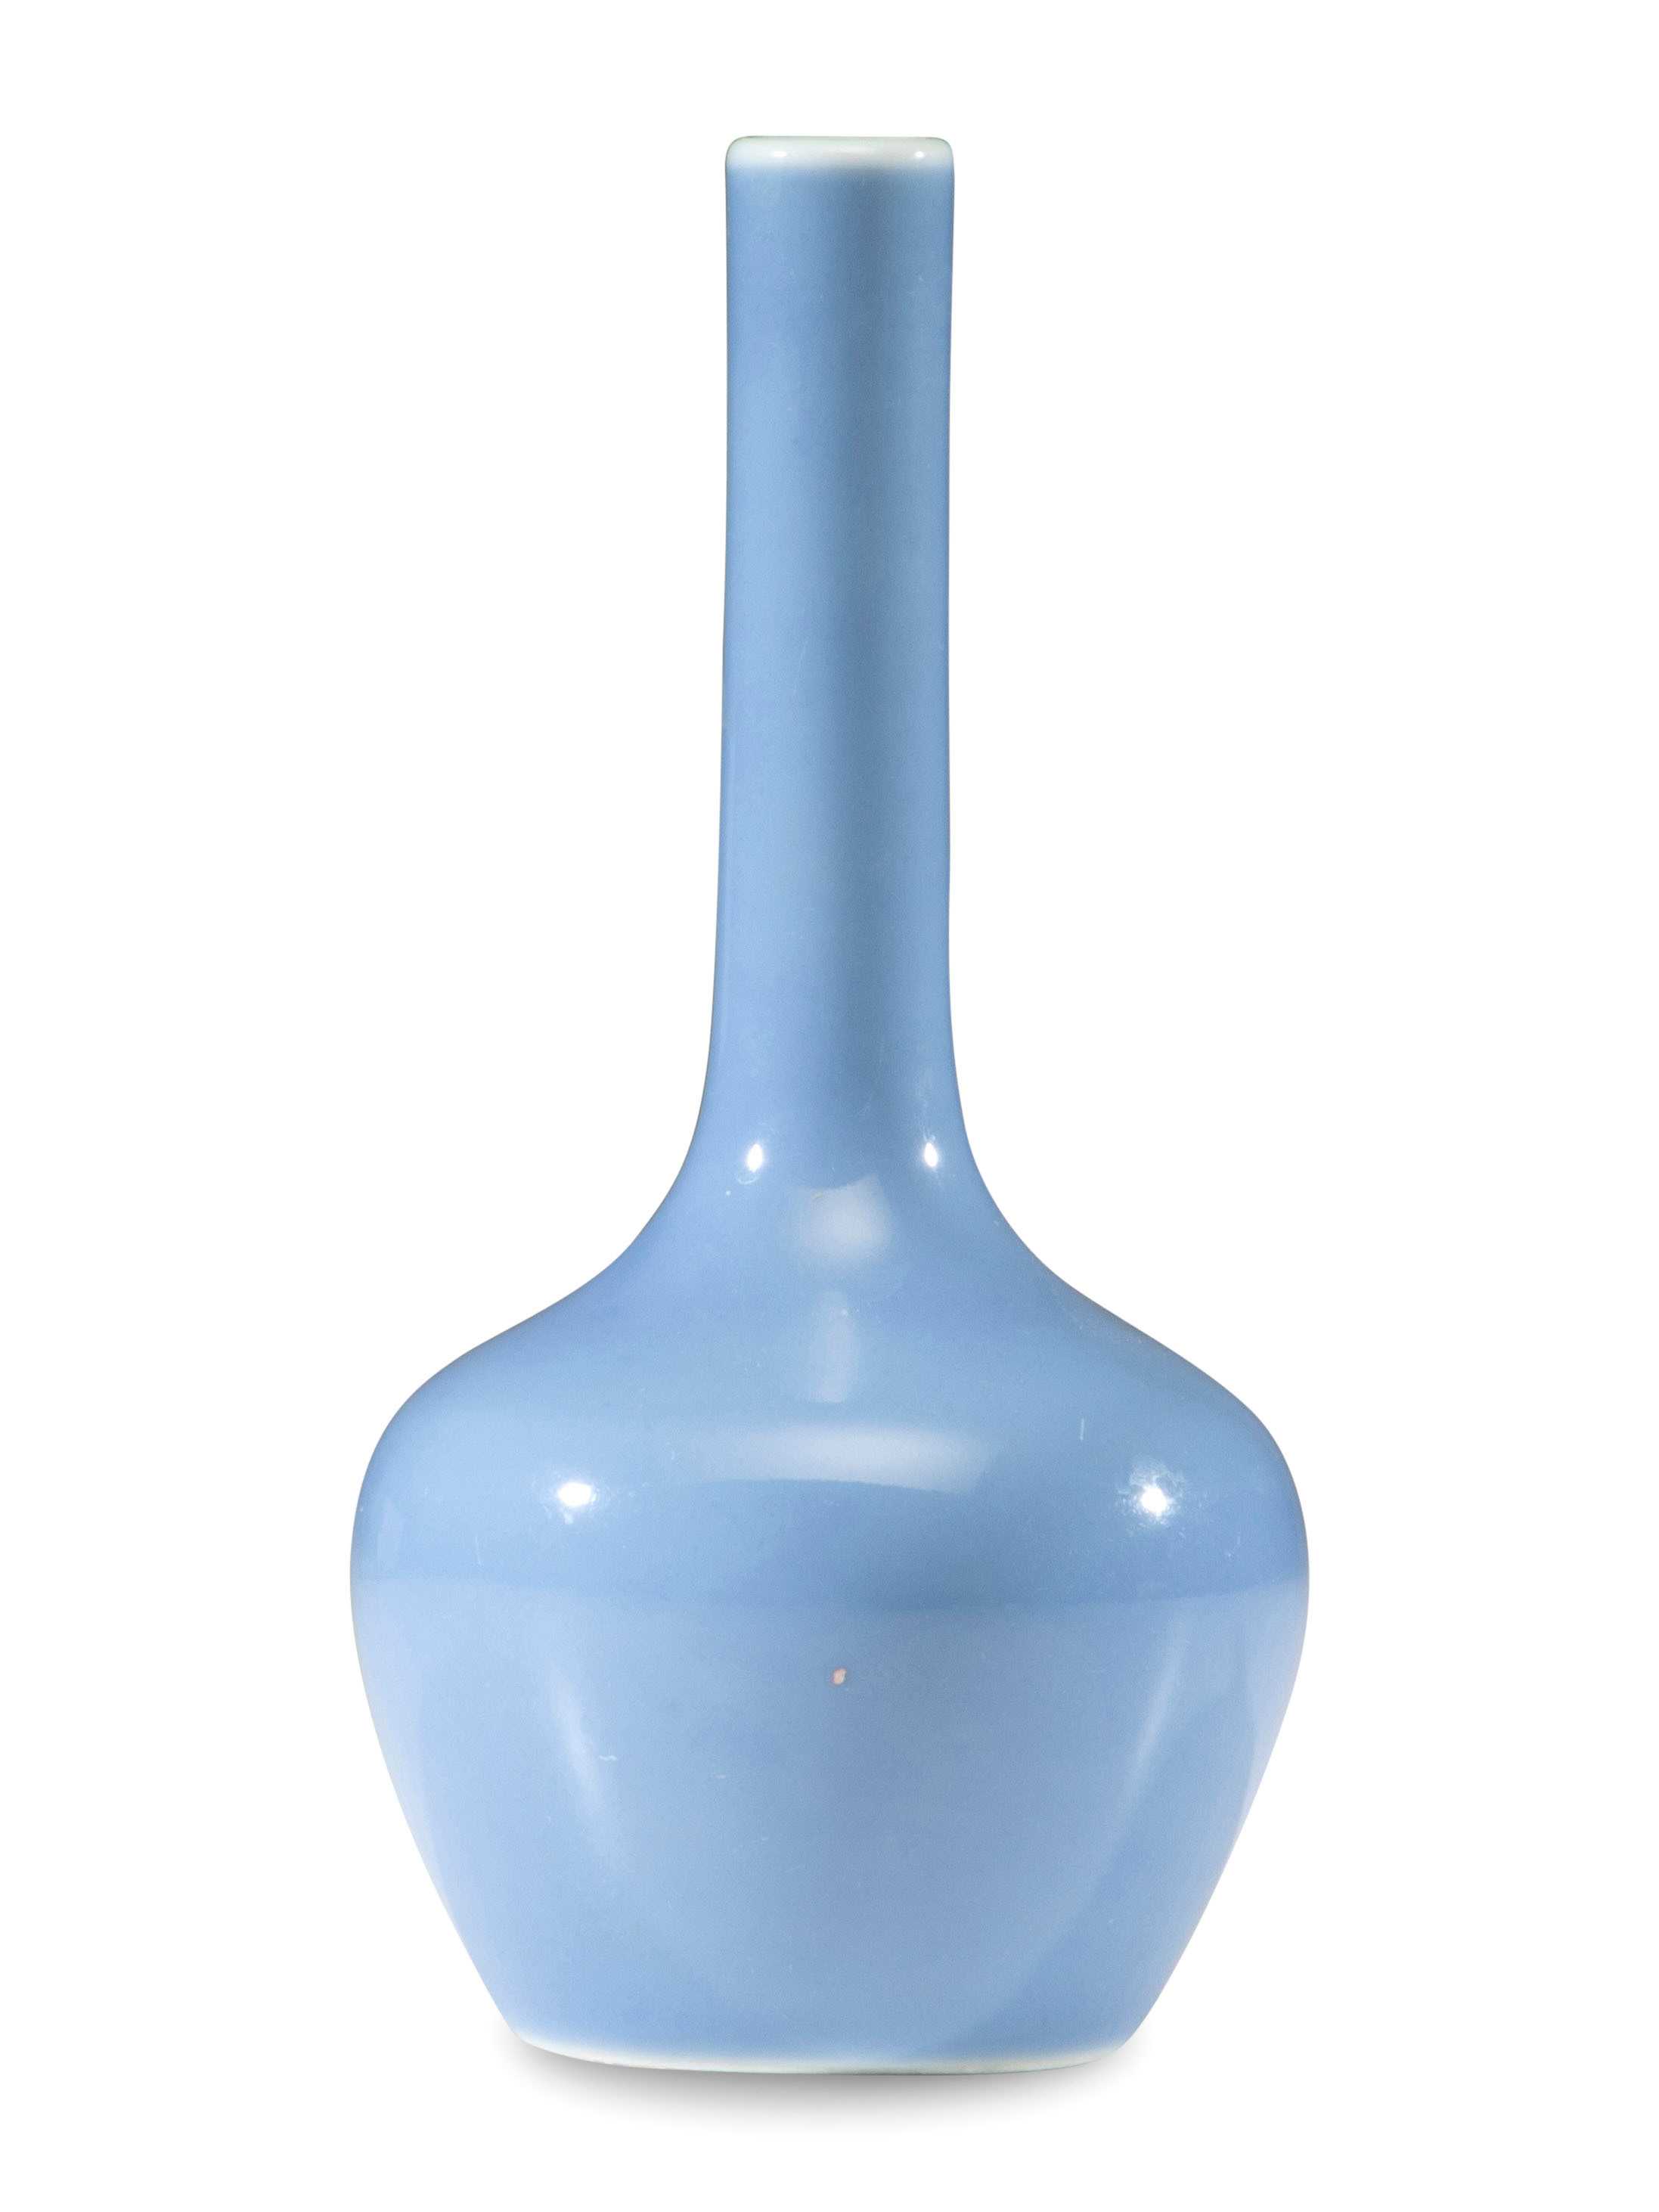 Qing clair-de-lune bottle vase with a six-character Yongzheng mark, which hammered for $350,000 and sold for $458,500 with buyer’s premium at Freeman’s Hindman on March 24.